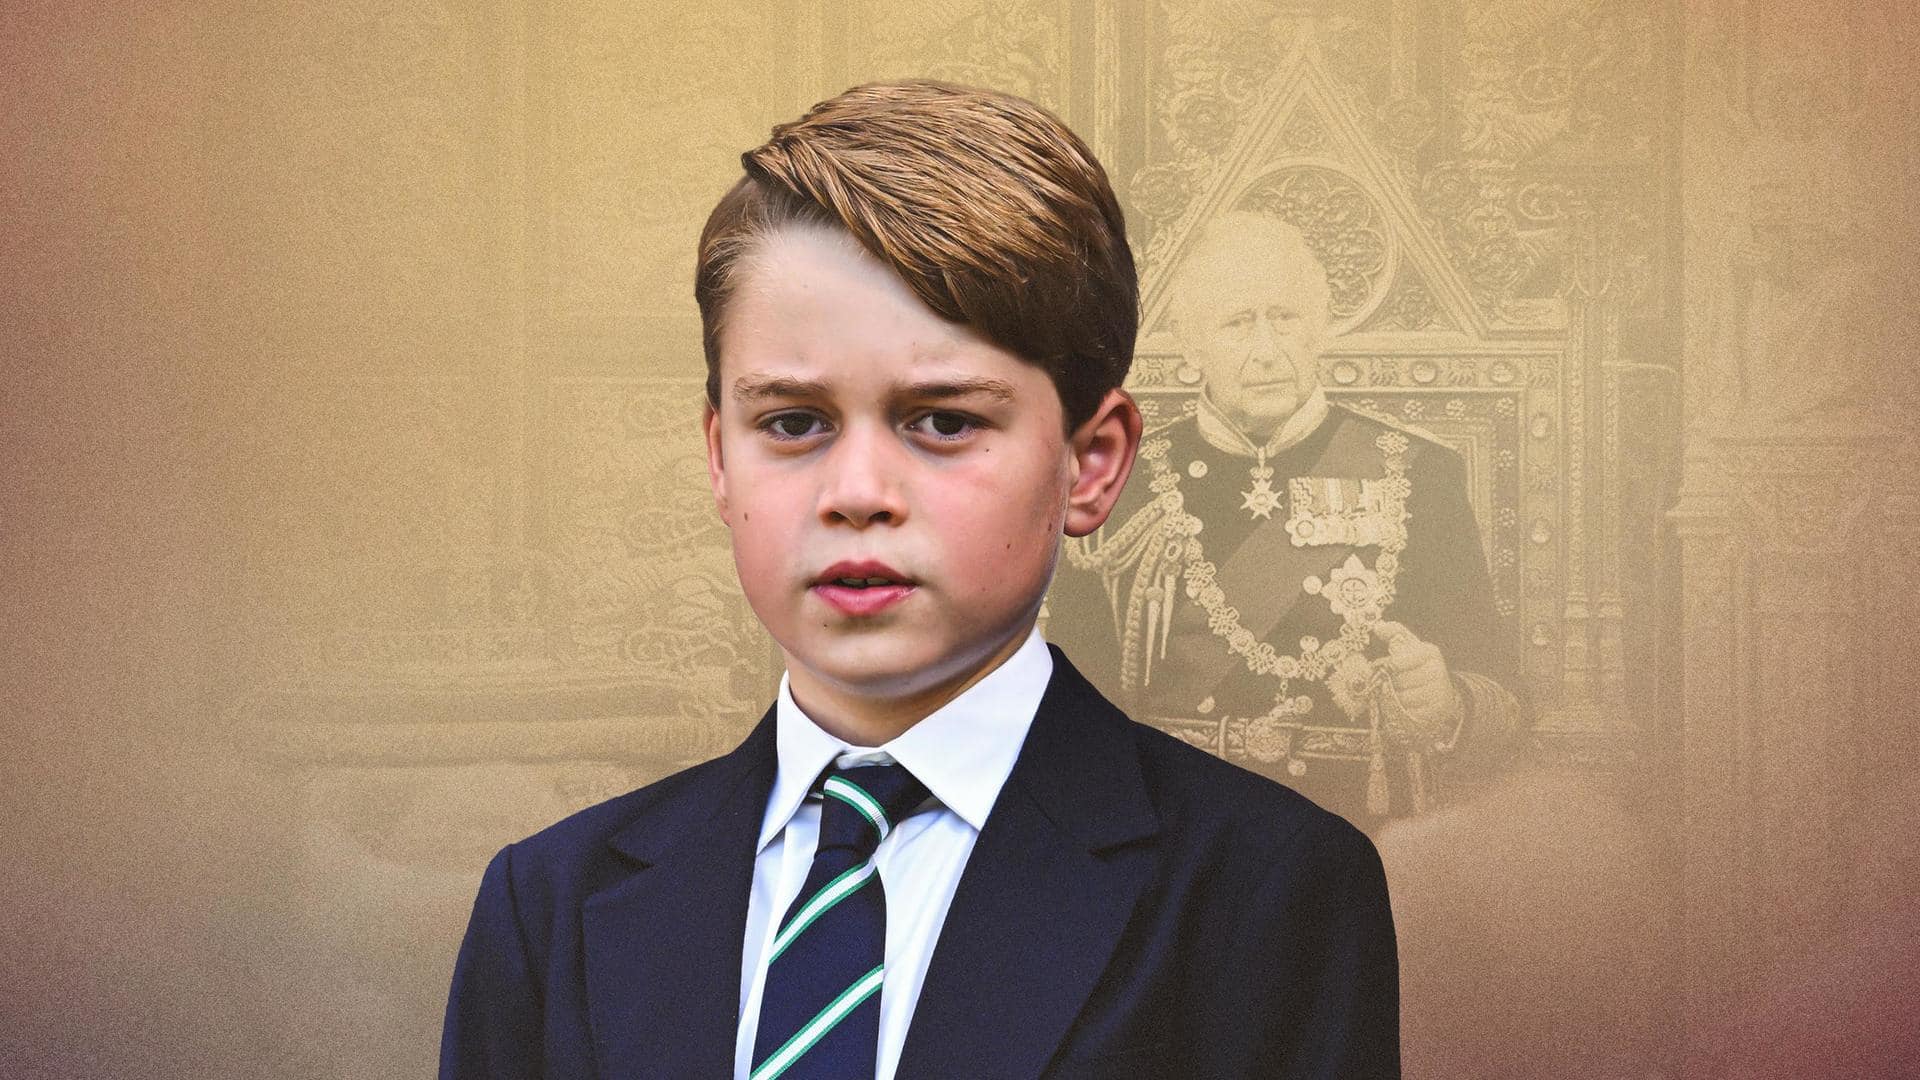 Prince George to 'protect king' during coronation; will carry sword